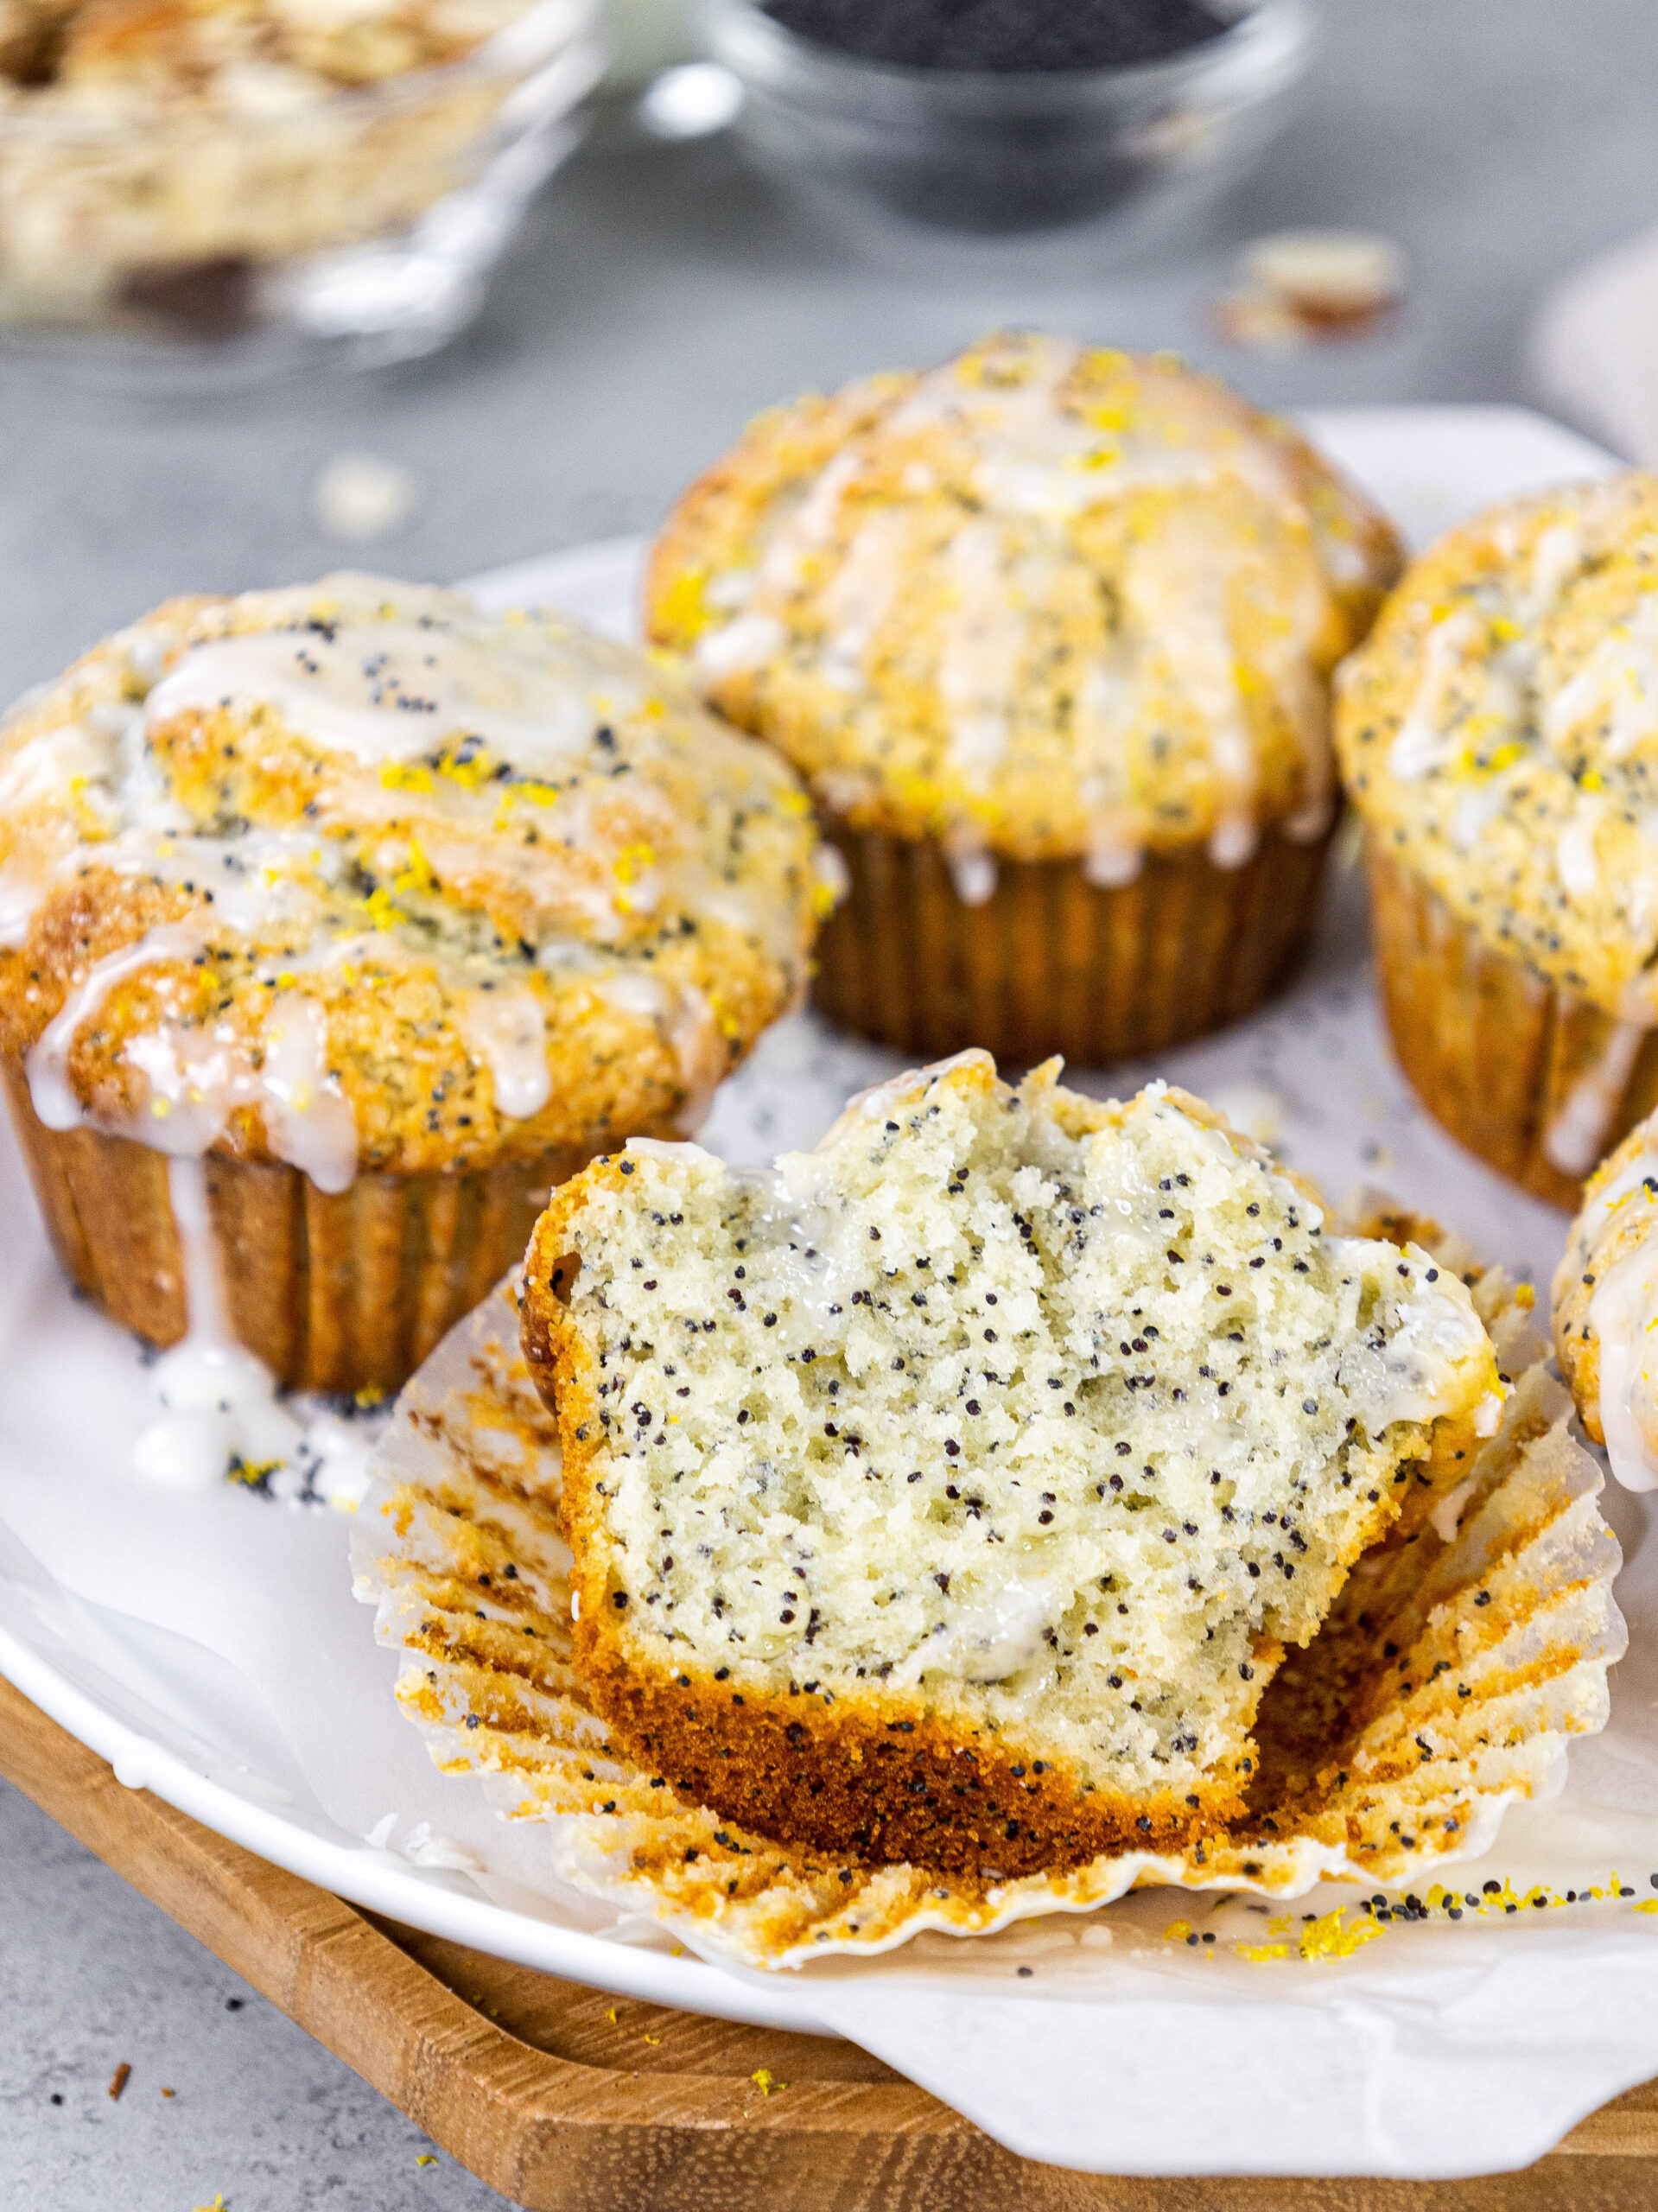 image of almond poppy seed muffins glazed with almond glaze sitting on a tray with one cut open to show how fluffy and tender the inside is